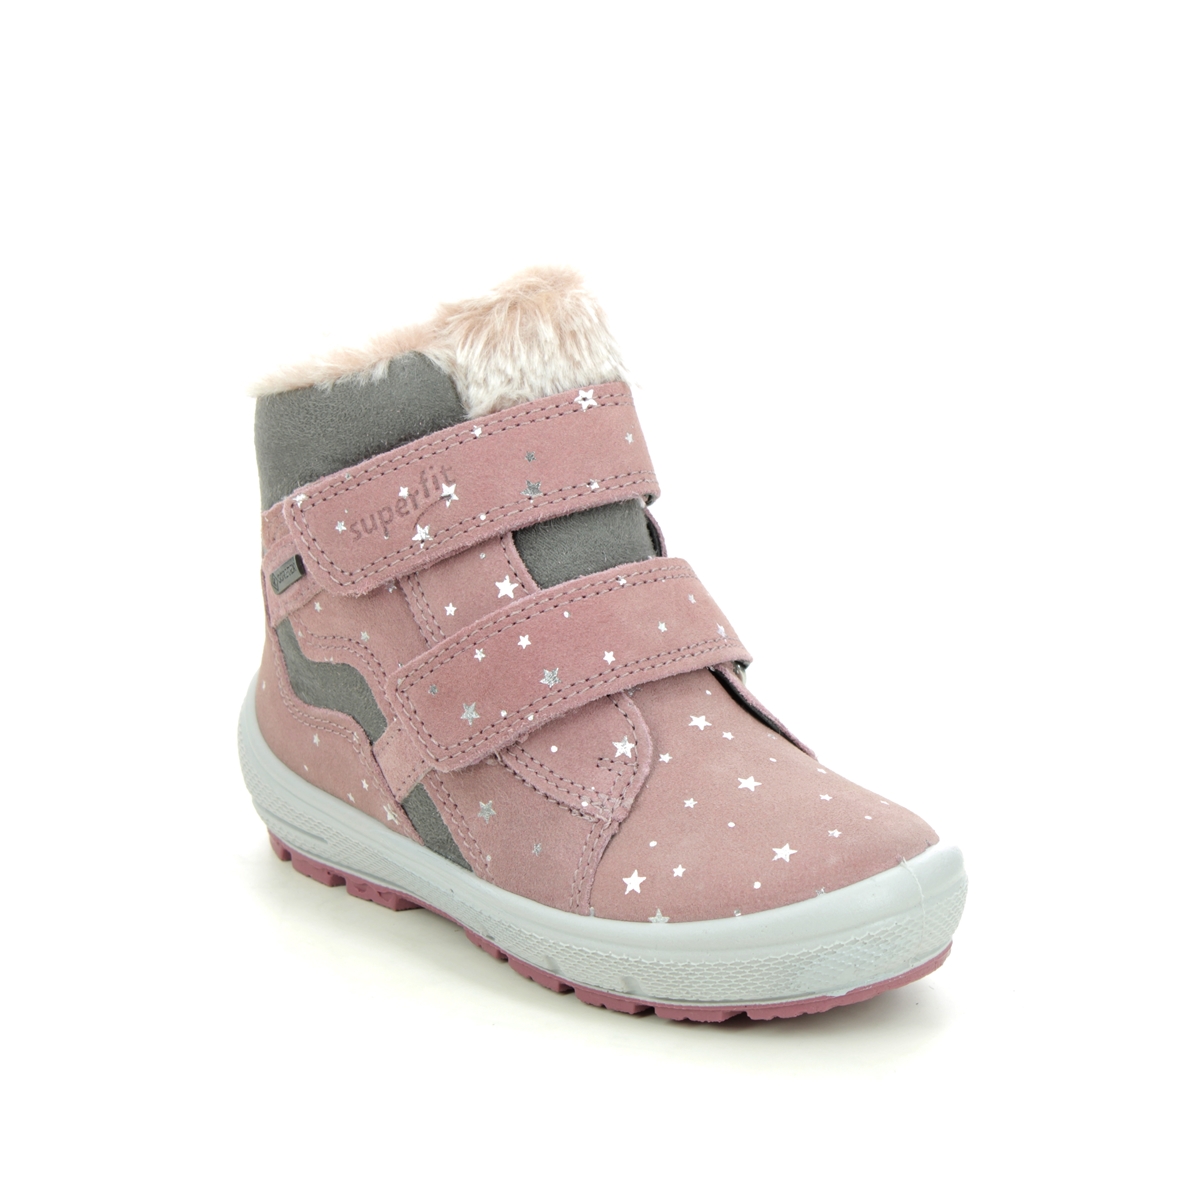 Superfit Groovy Gtx Pink Leather Kids Toddler Girls Boots 1006316-5500 In Size 28 In Plain Pink Leather